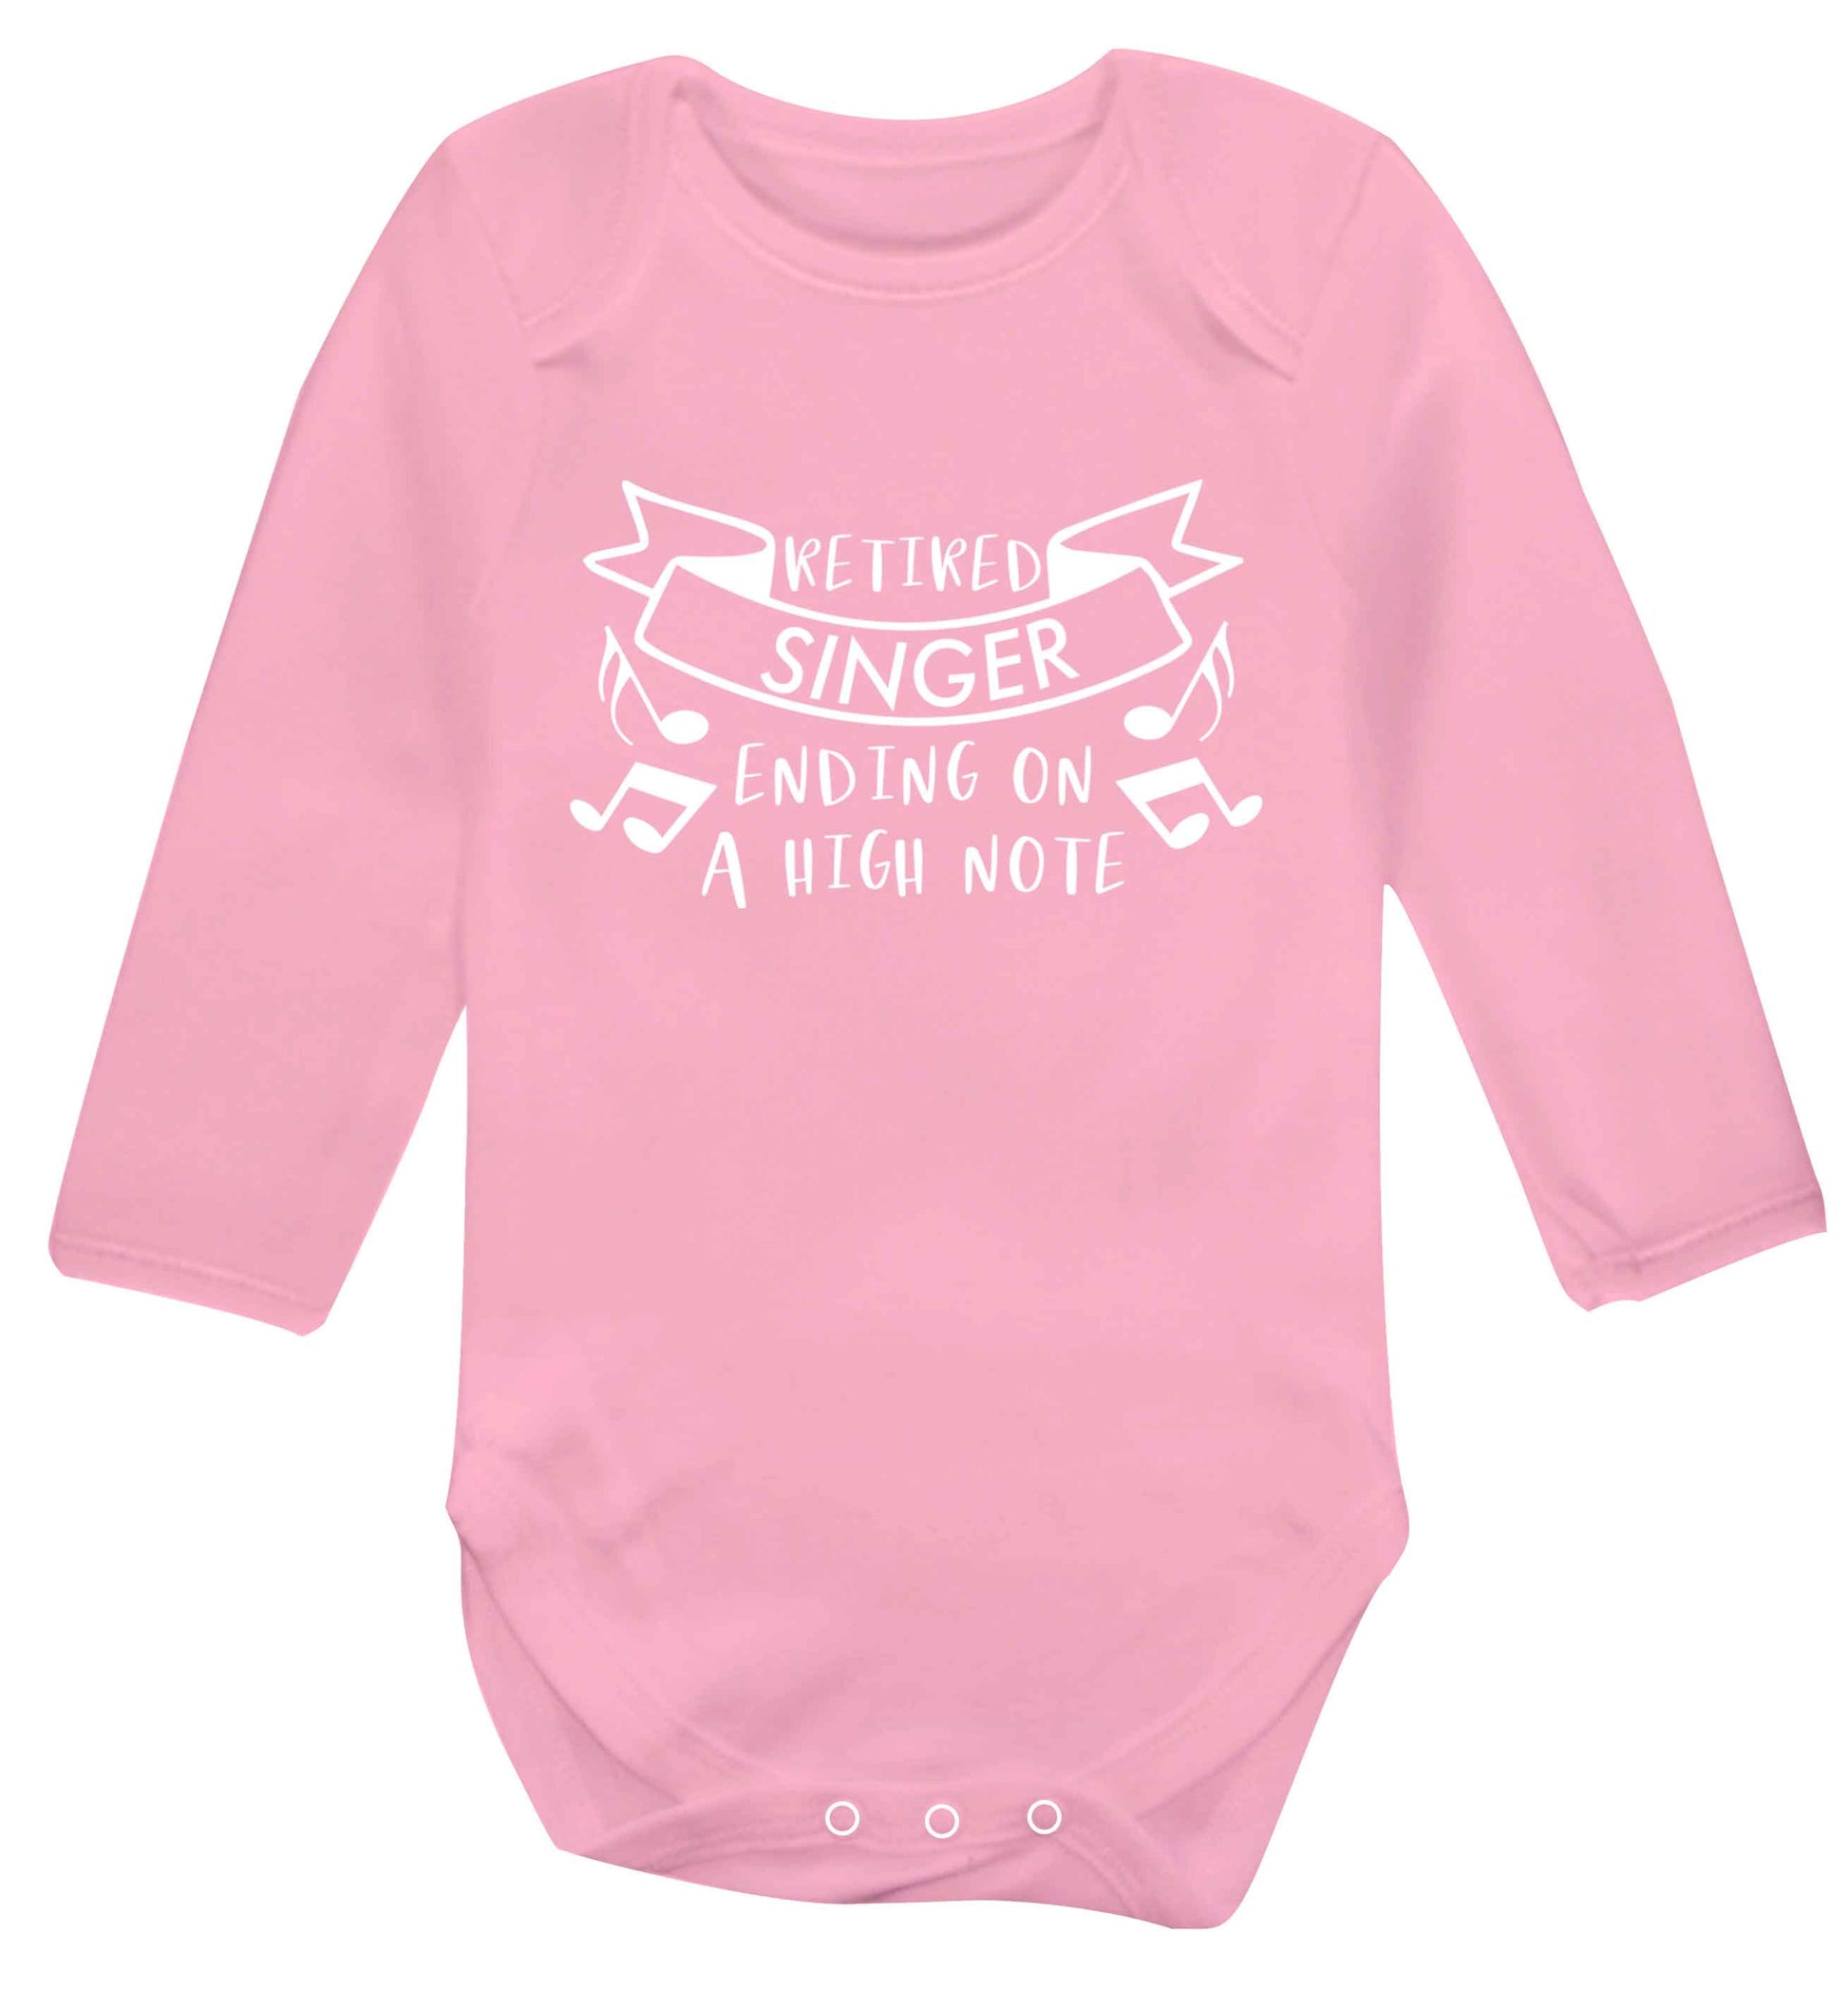 Retired singer ending on a high note Baby Vest long sleeved pale pink 6-12 months